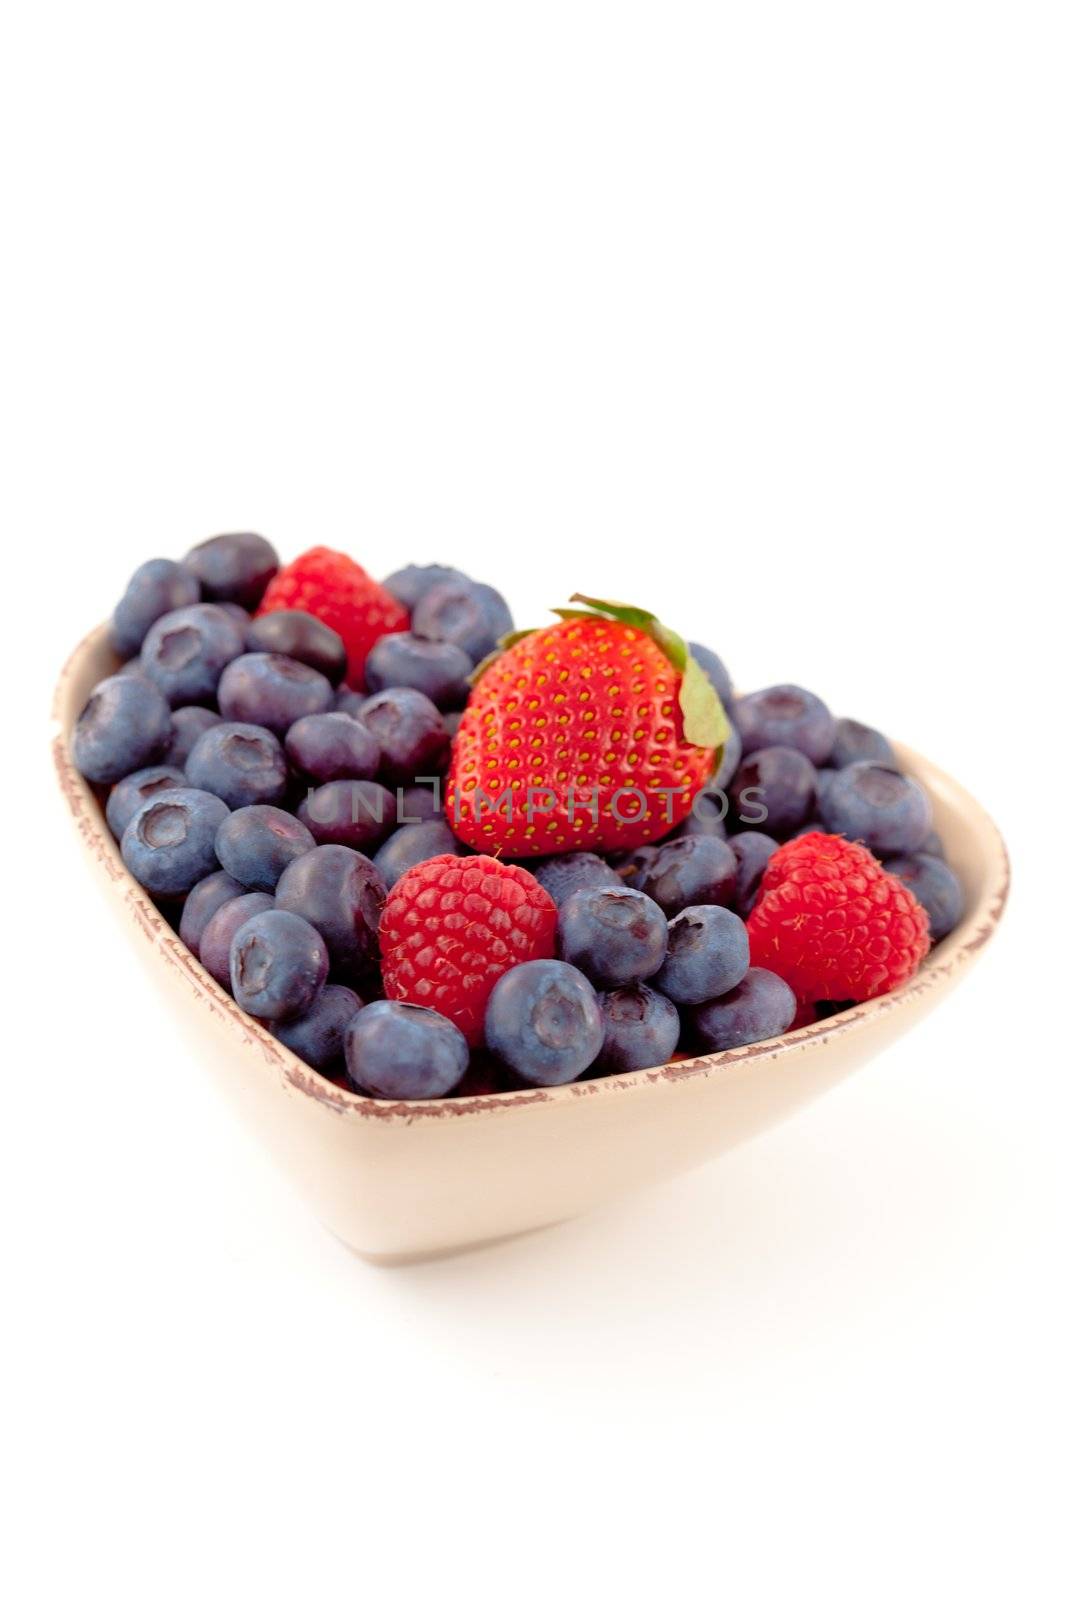 Berries in a heart shaped bowl against a white background